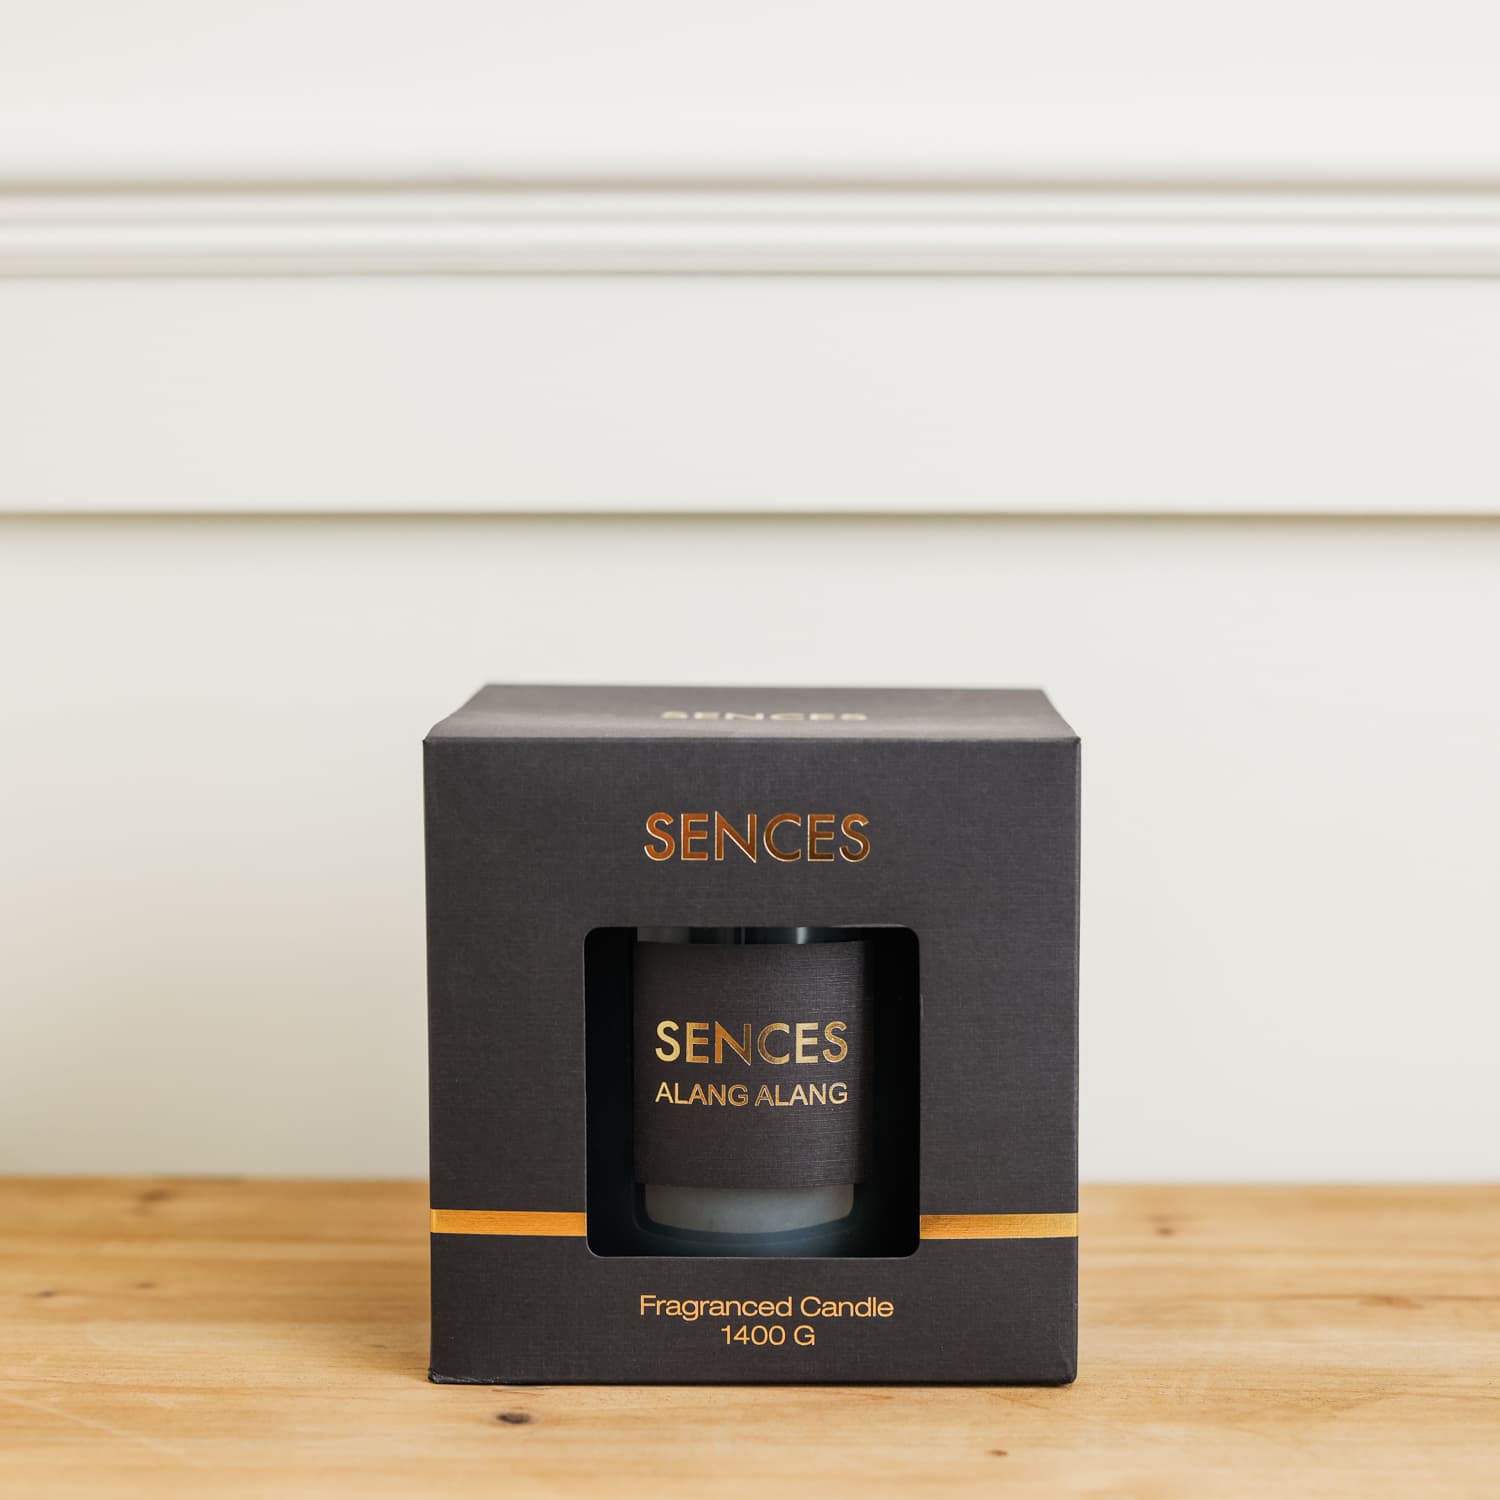 Sences Alang Alang Onyx Candle in black presentation box on wooden console. 